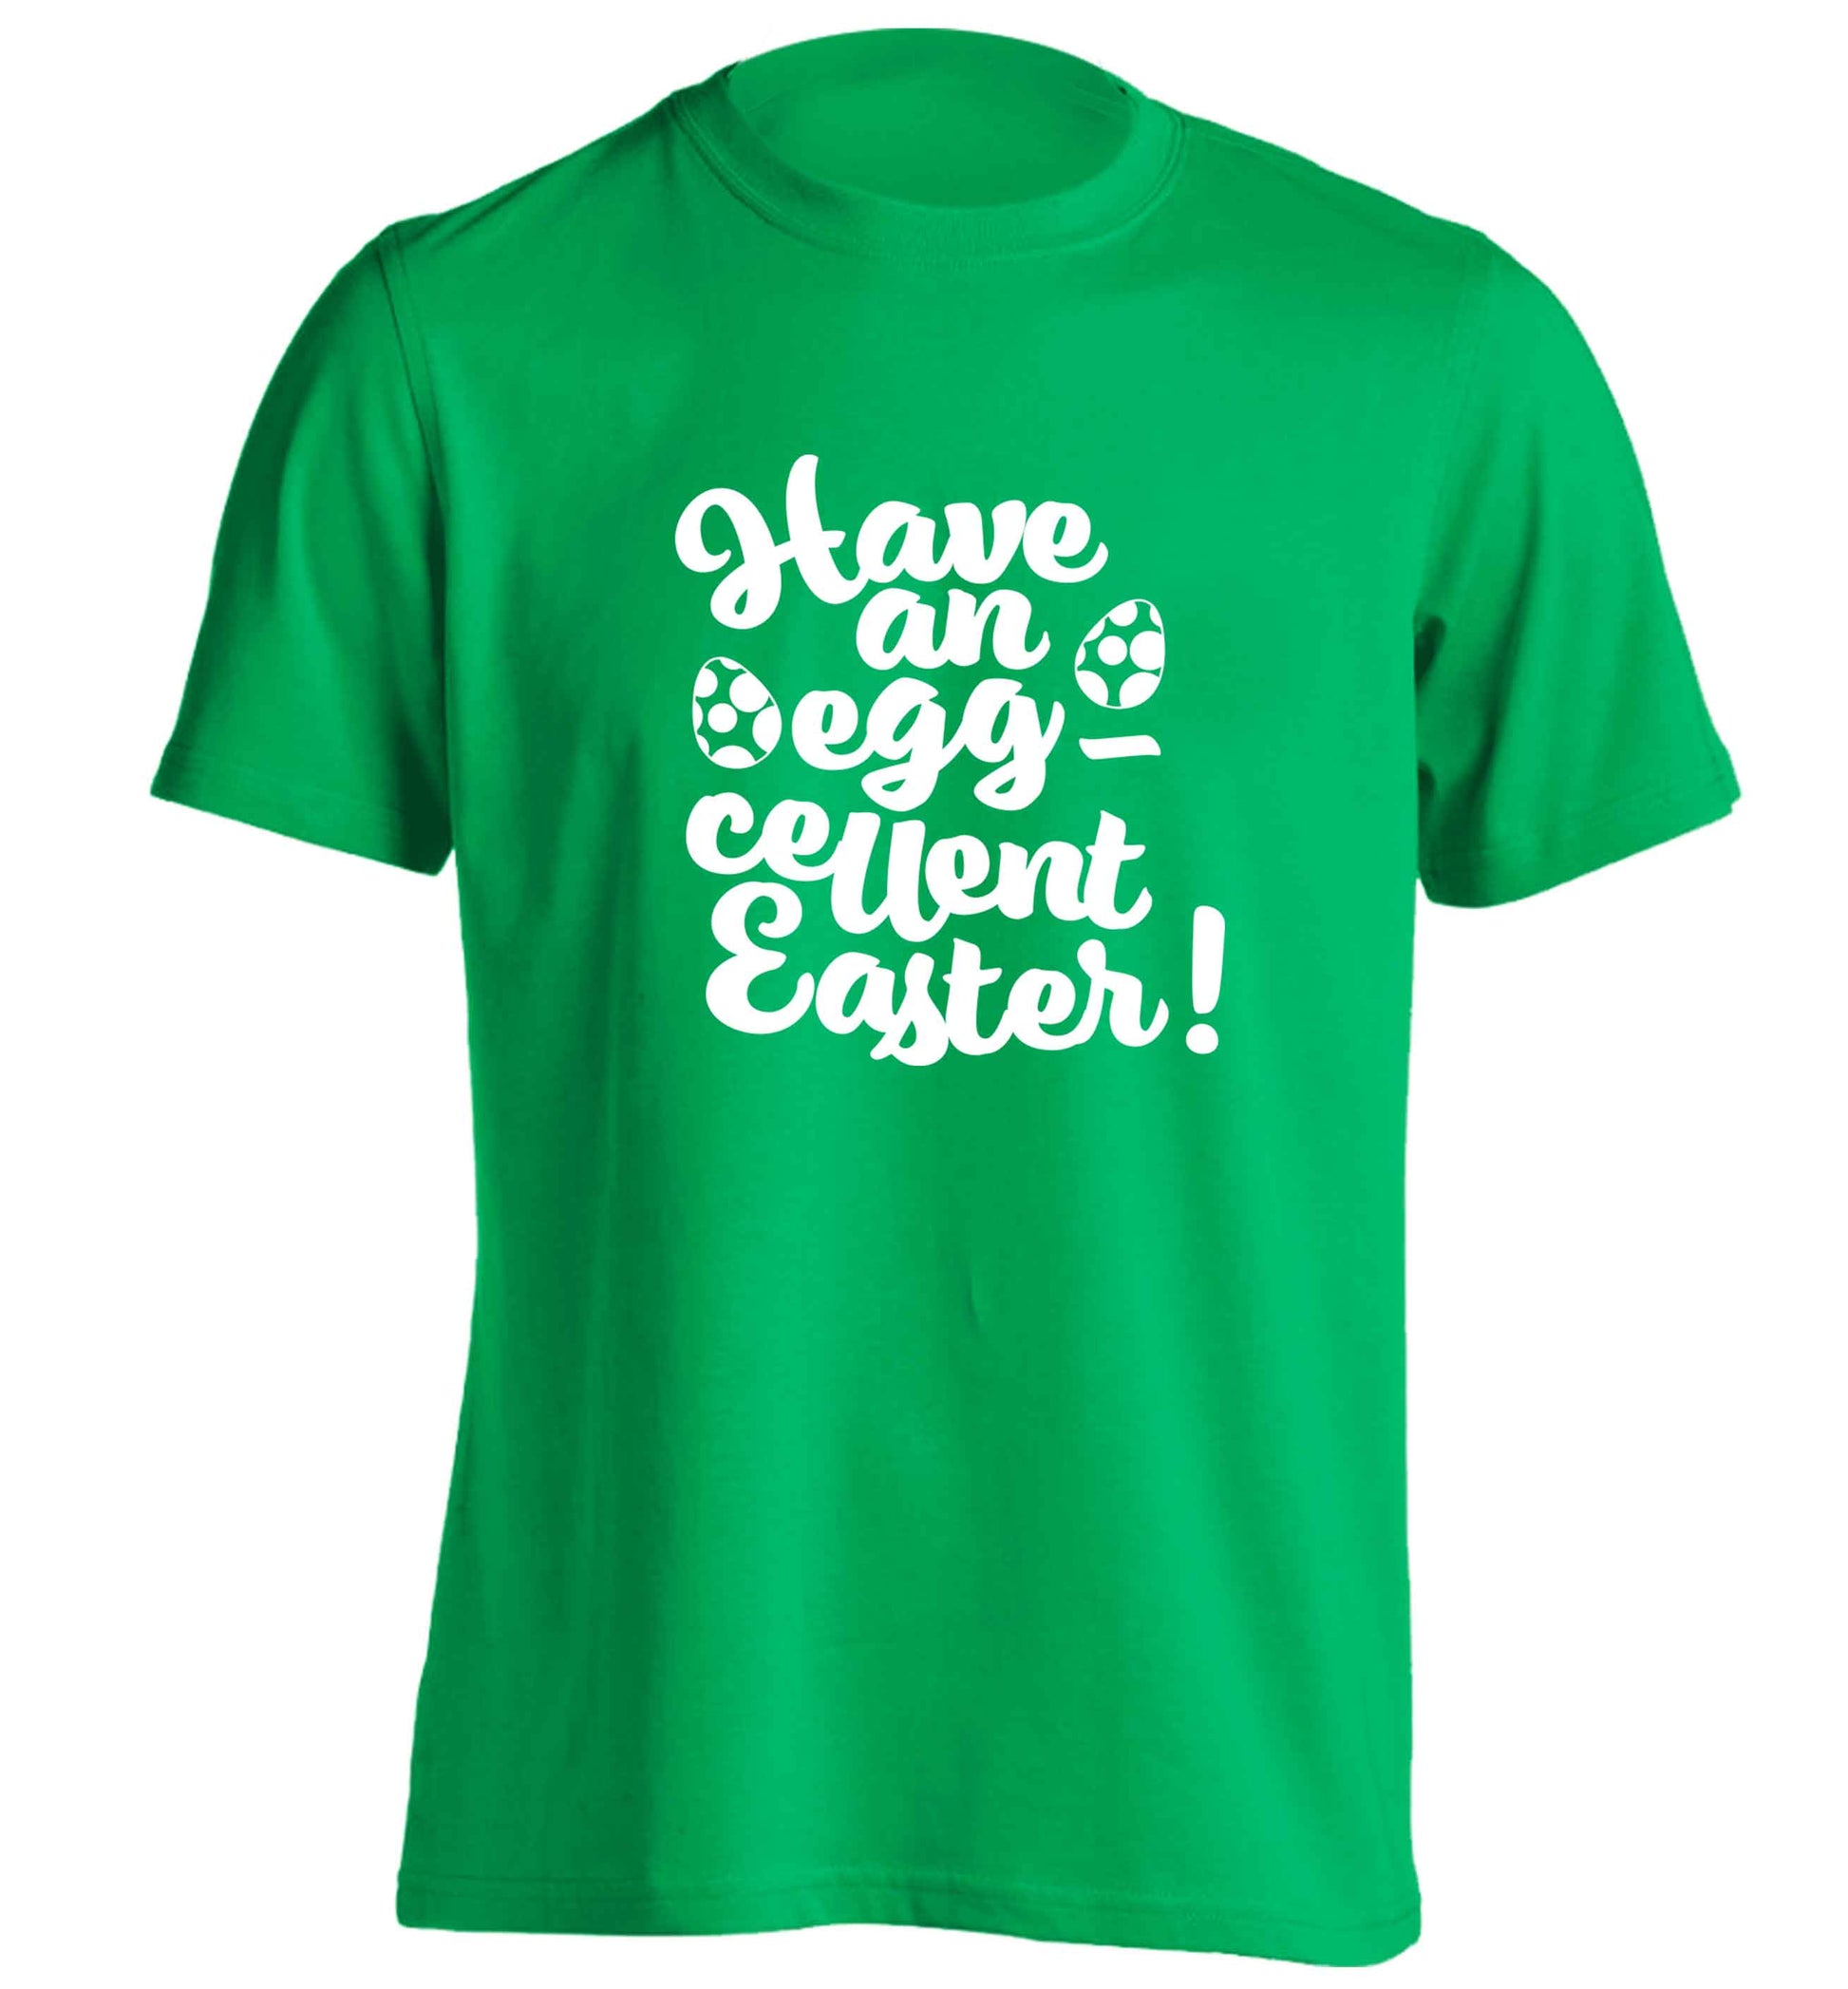 Have an eggcellent Easter adults unisex green Tshirt 2XL